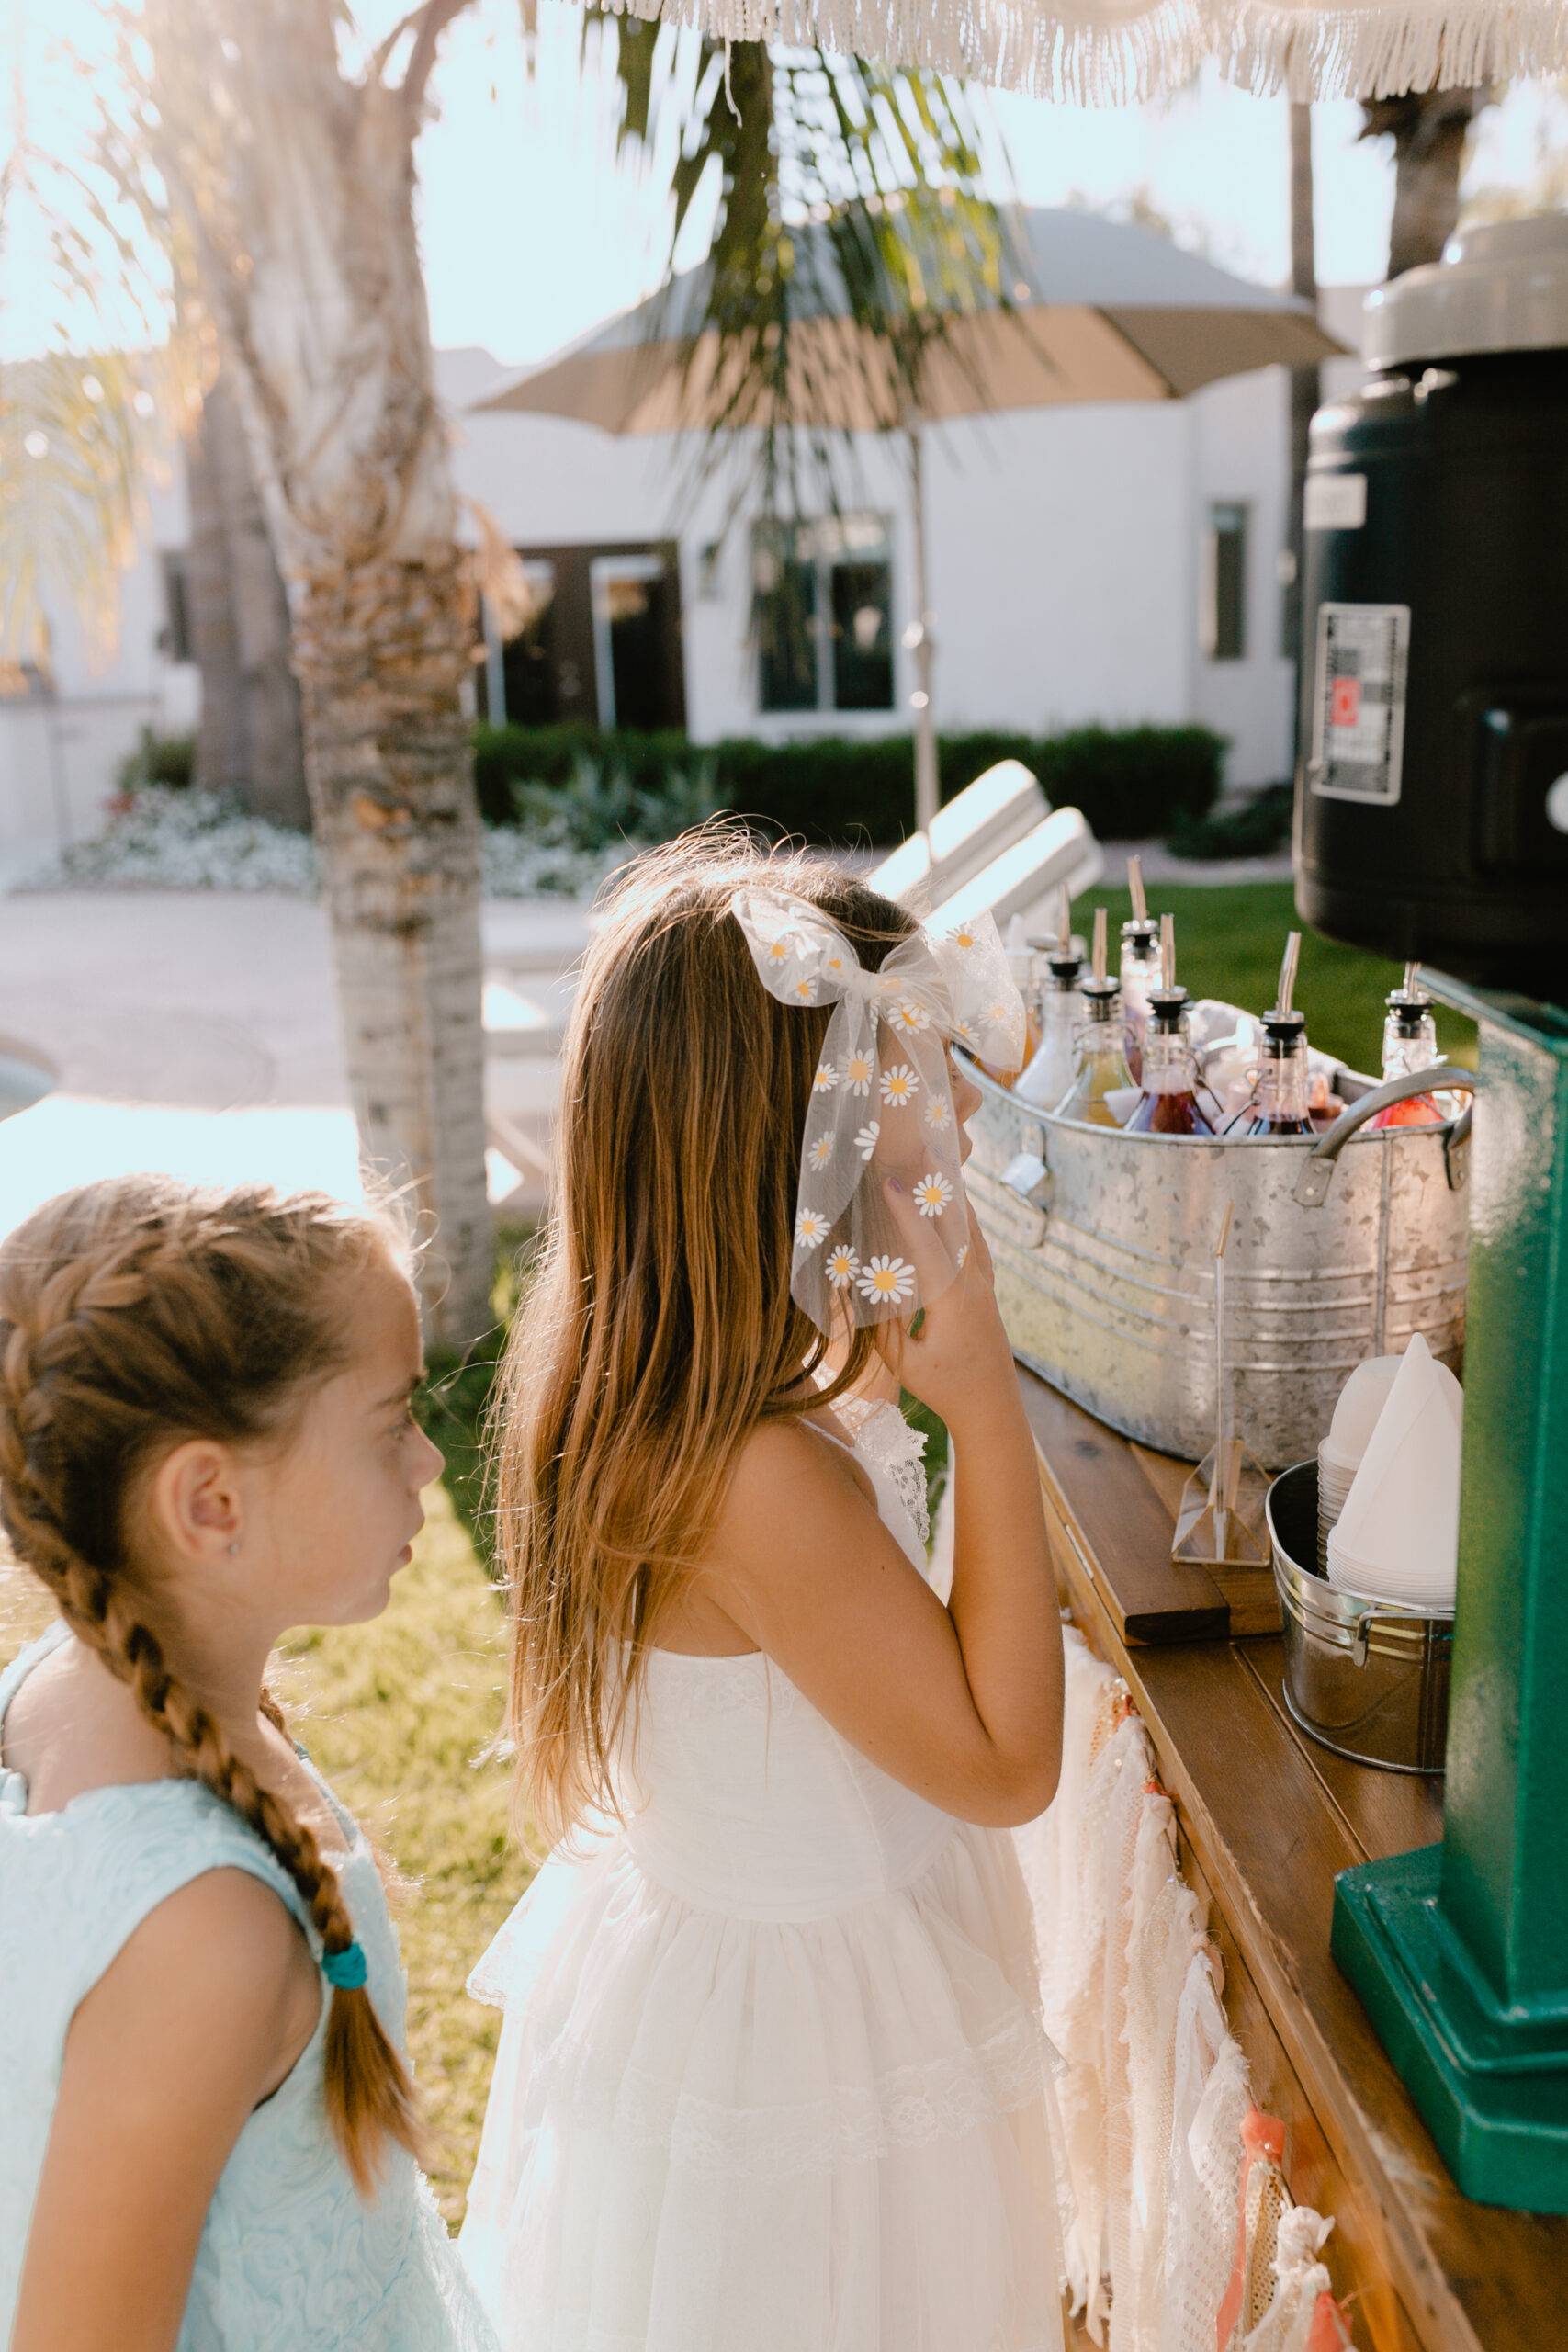 step right up for the best shave ice you've ever had! #ICEDgourmetshaveice #thelovedesignedlife #partiesandcelebrations #girlspartyideas